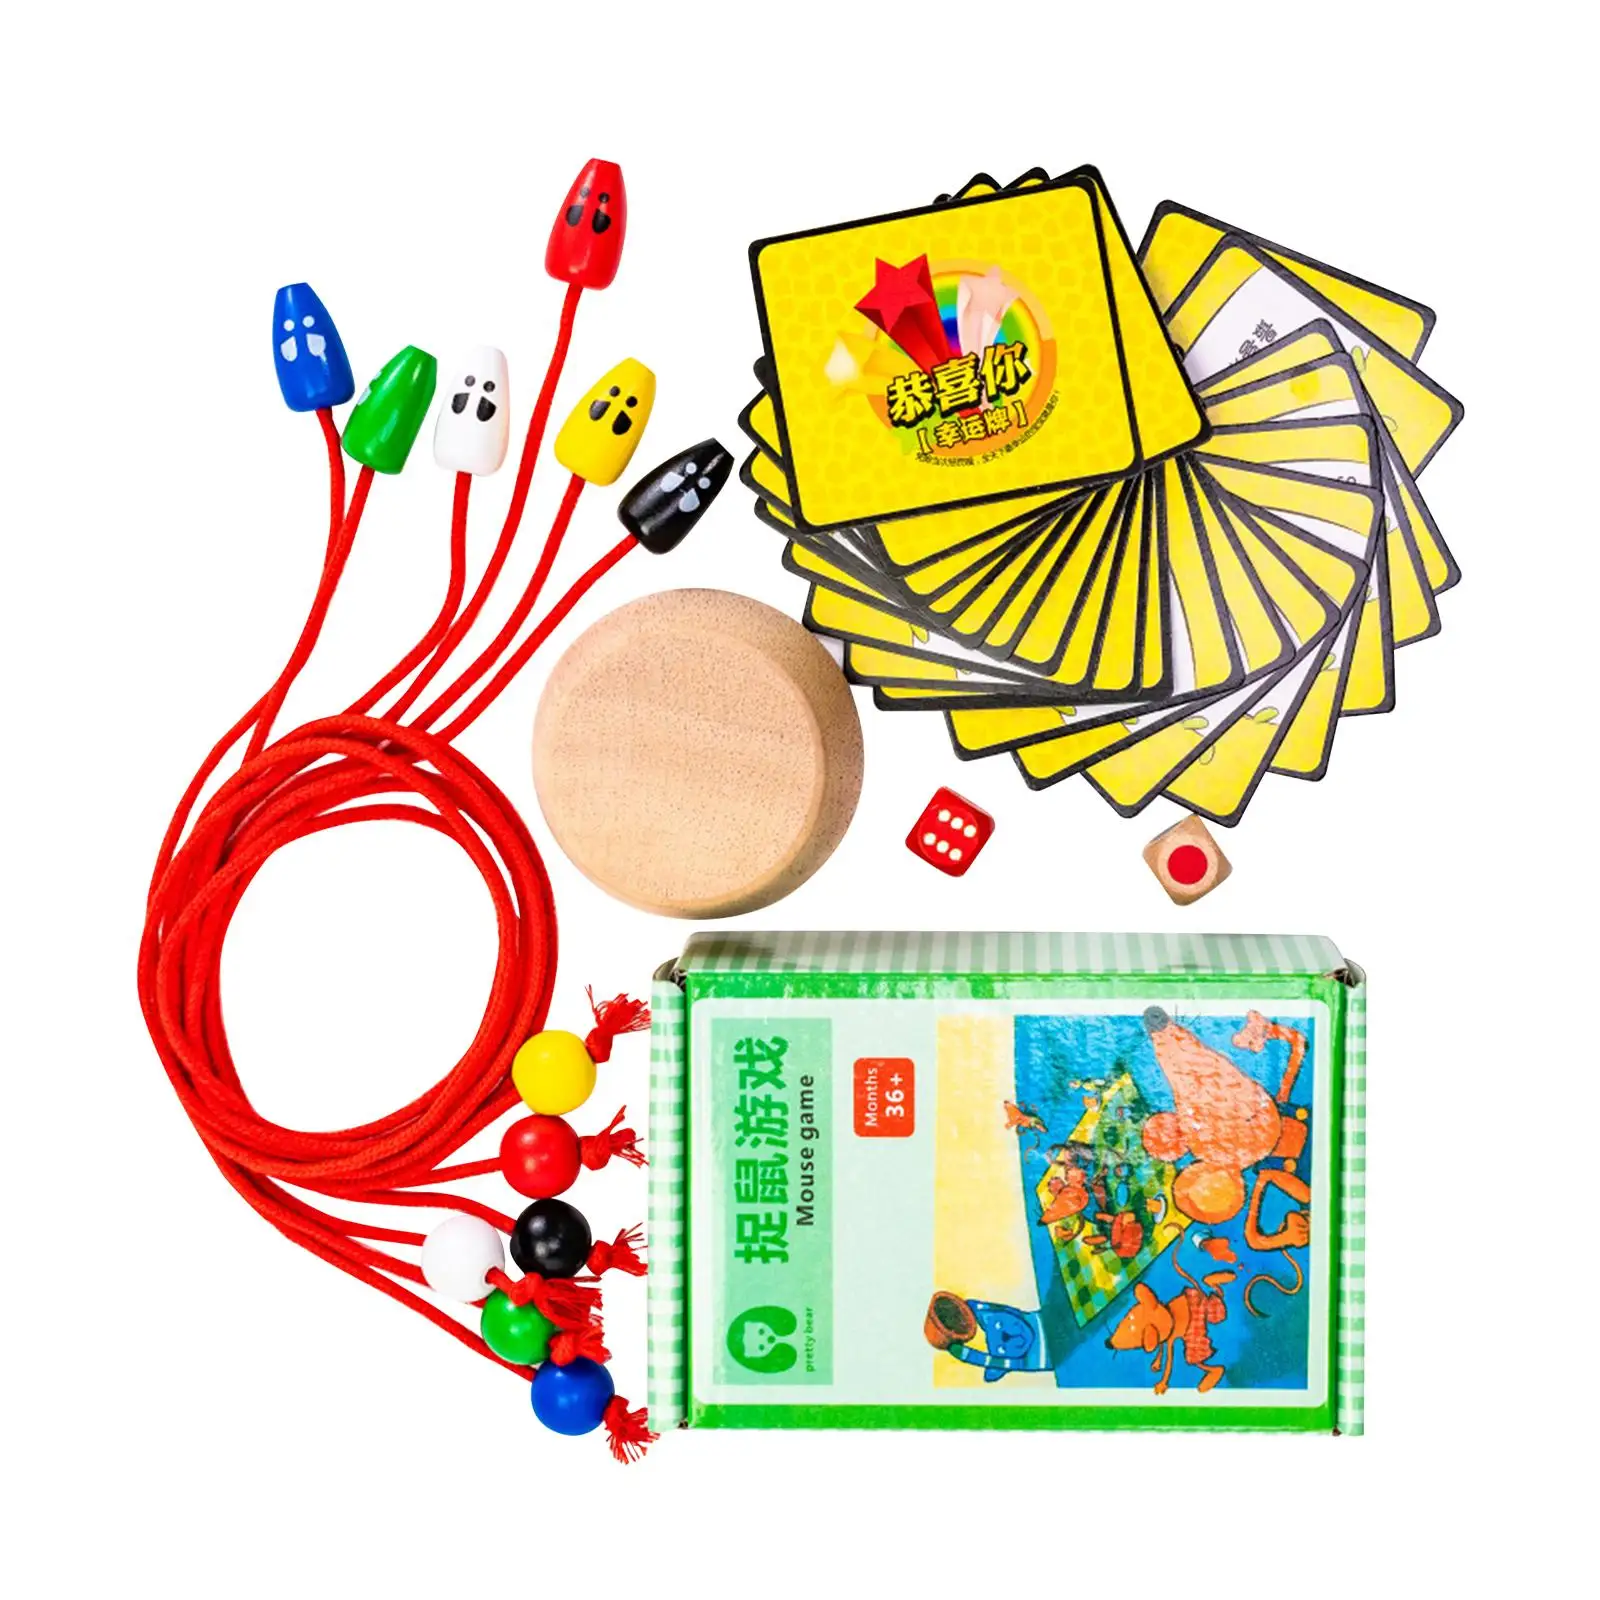 Wooden Mouse Catching Game Early Leaning Education Toy Develop Fine Motor Skills Desktop Game for Girls Teens Adults Boy